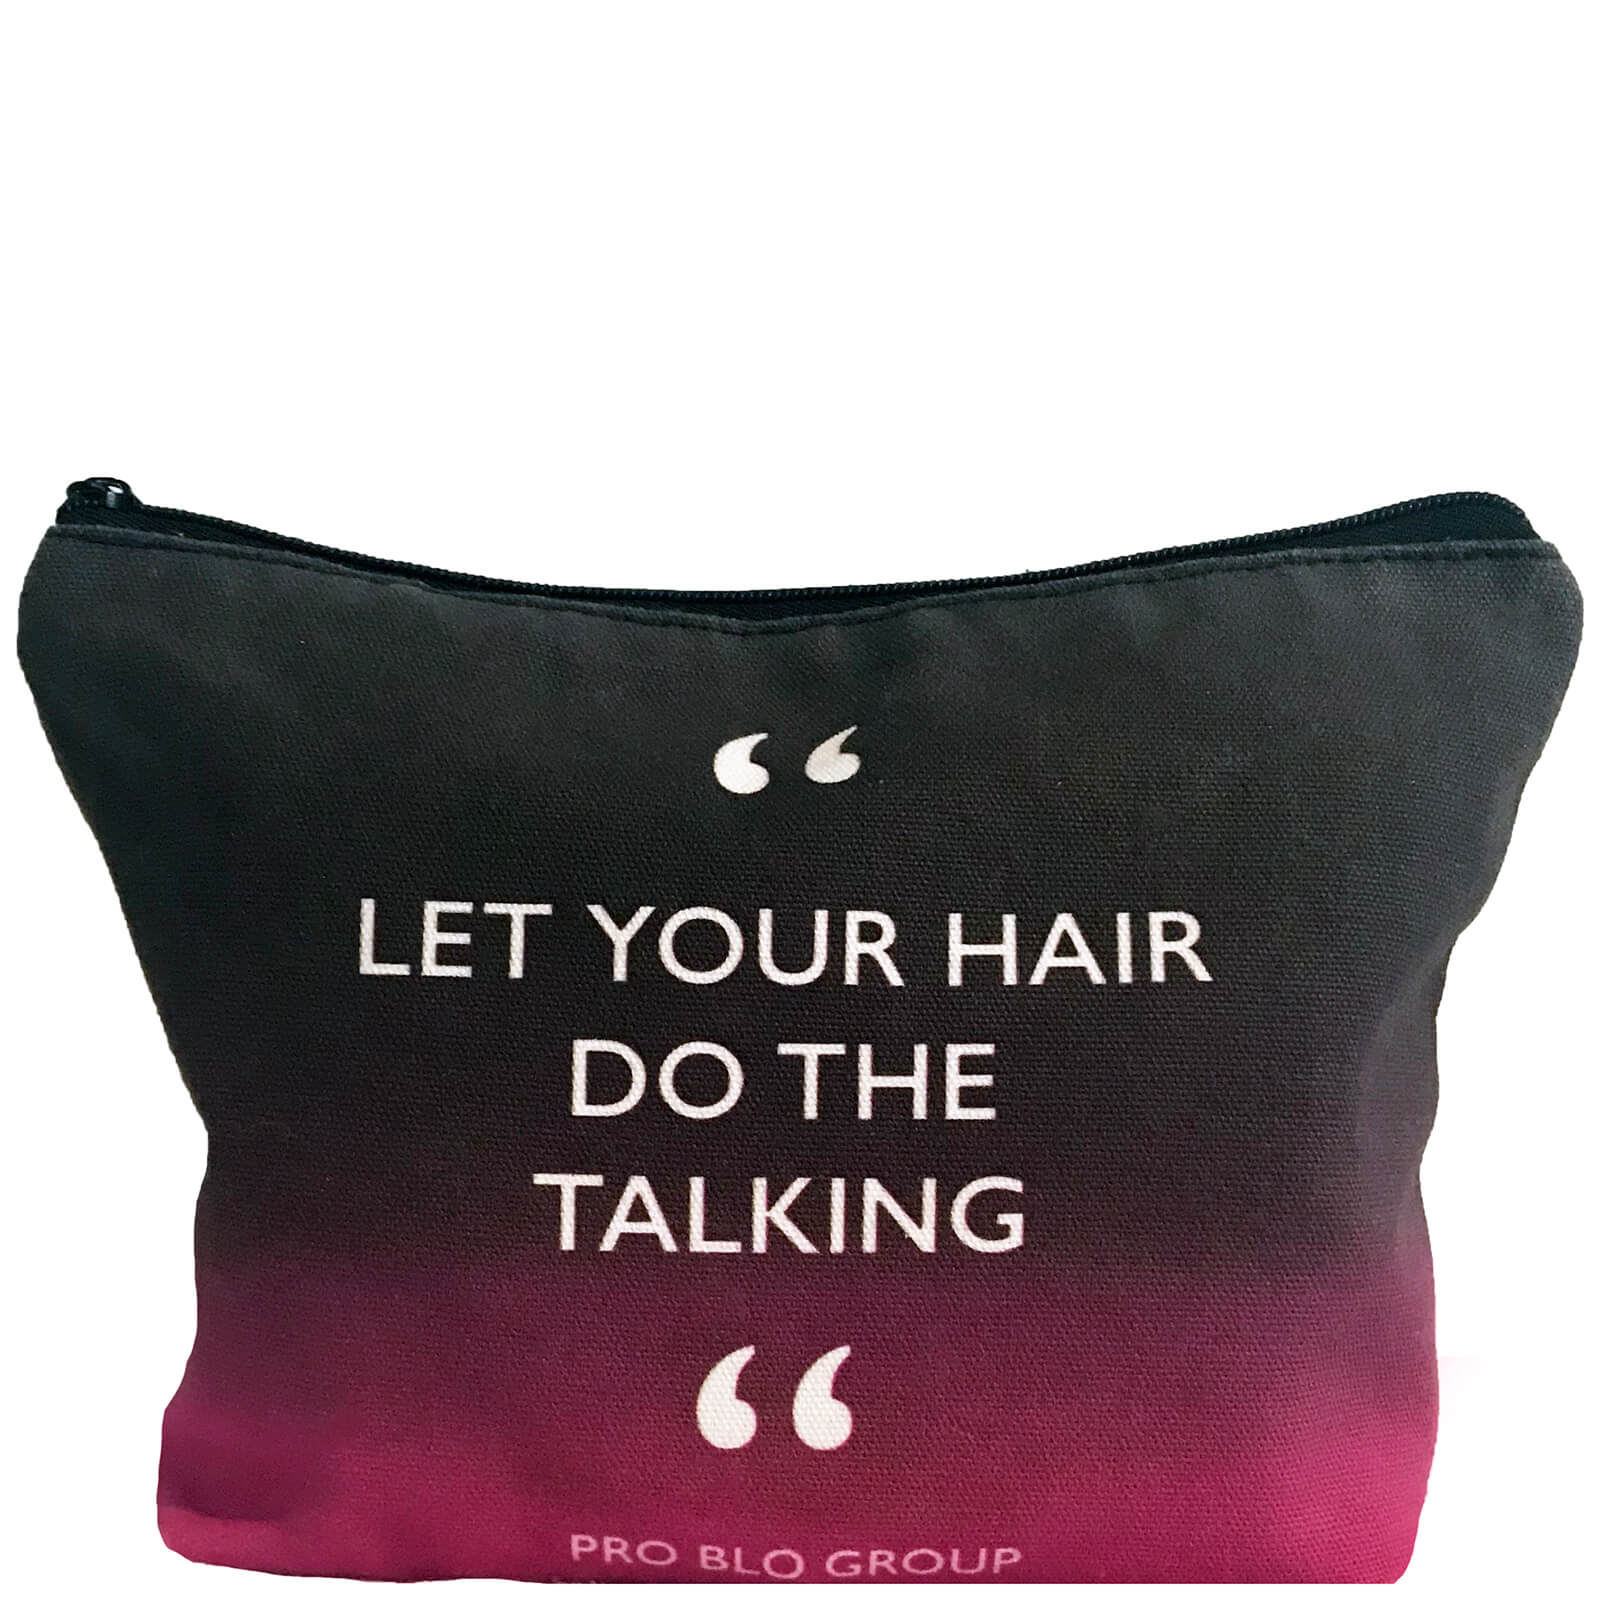 Pro Blo Let Your Hair Do The Talking